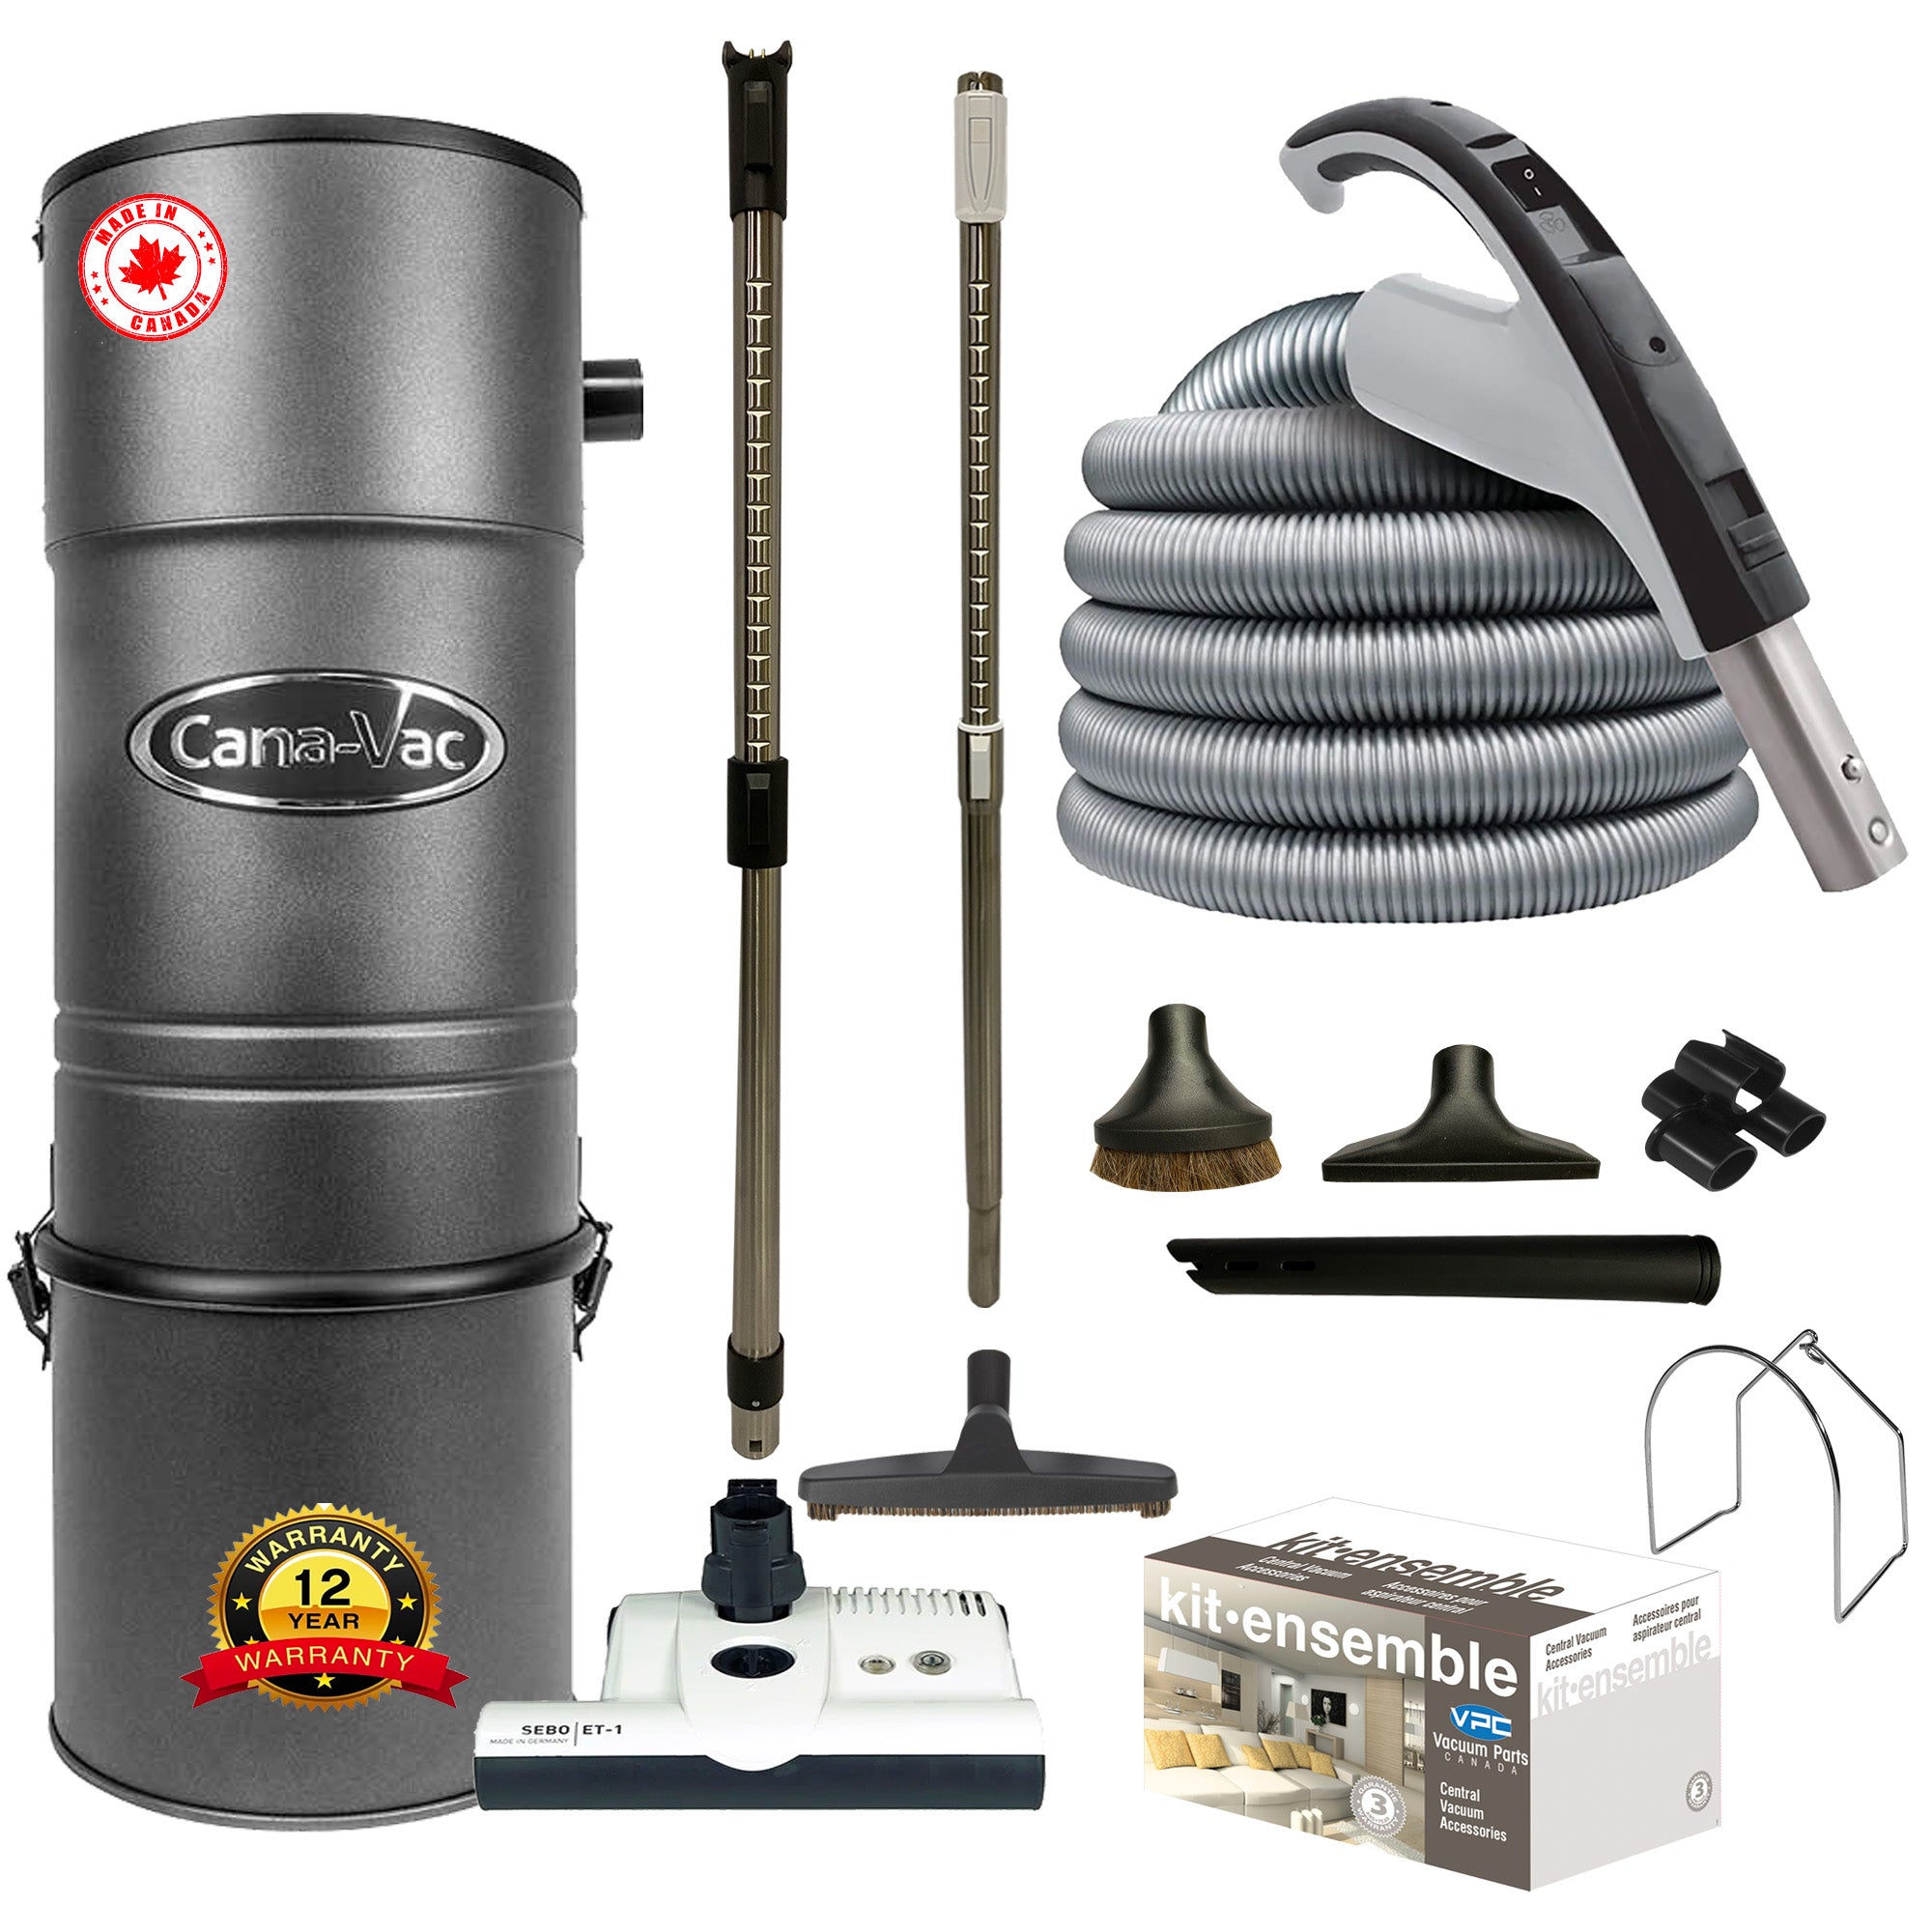 CanaVac CV787 Central Vacuum Cleaner with Premium Electric Package